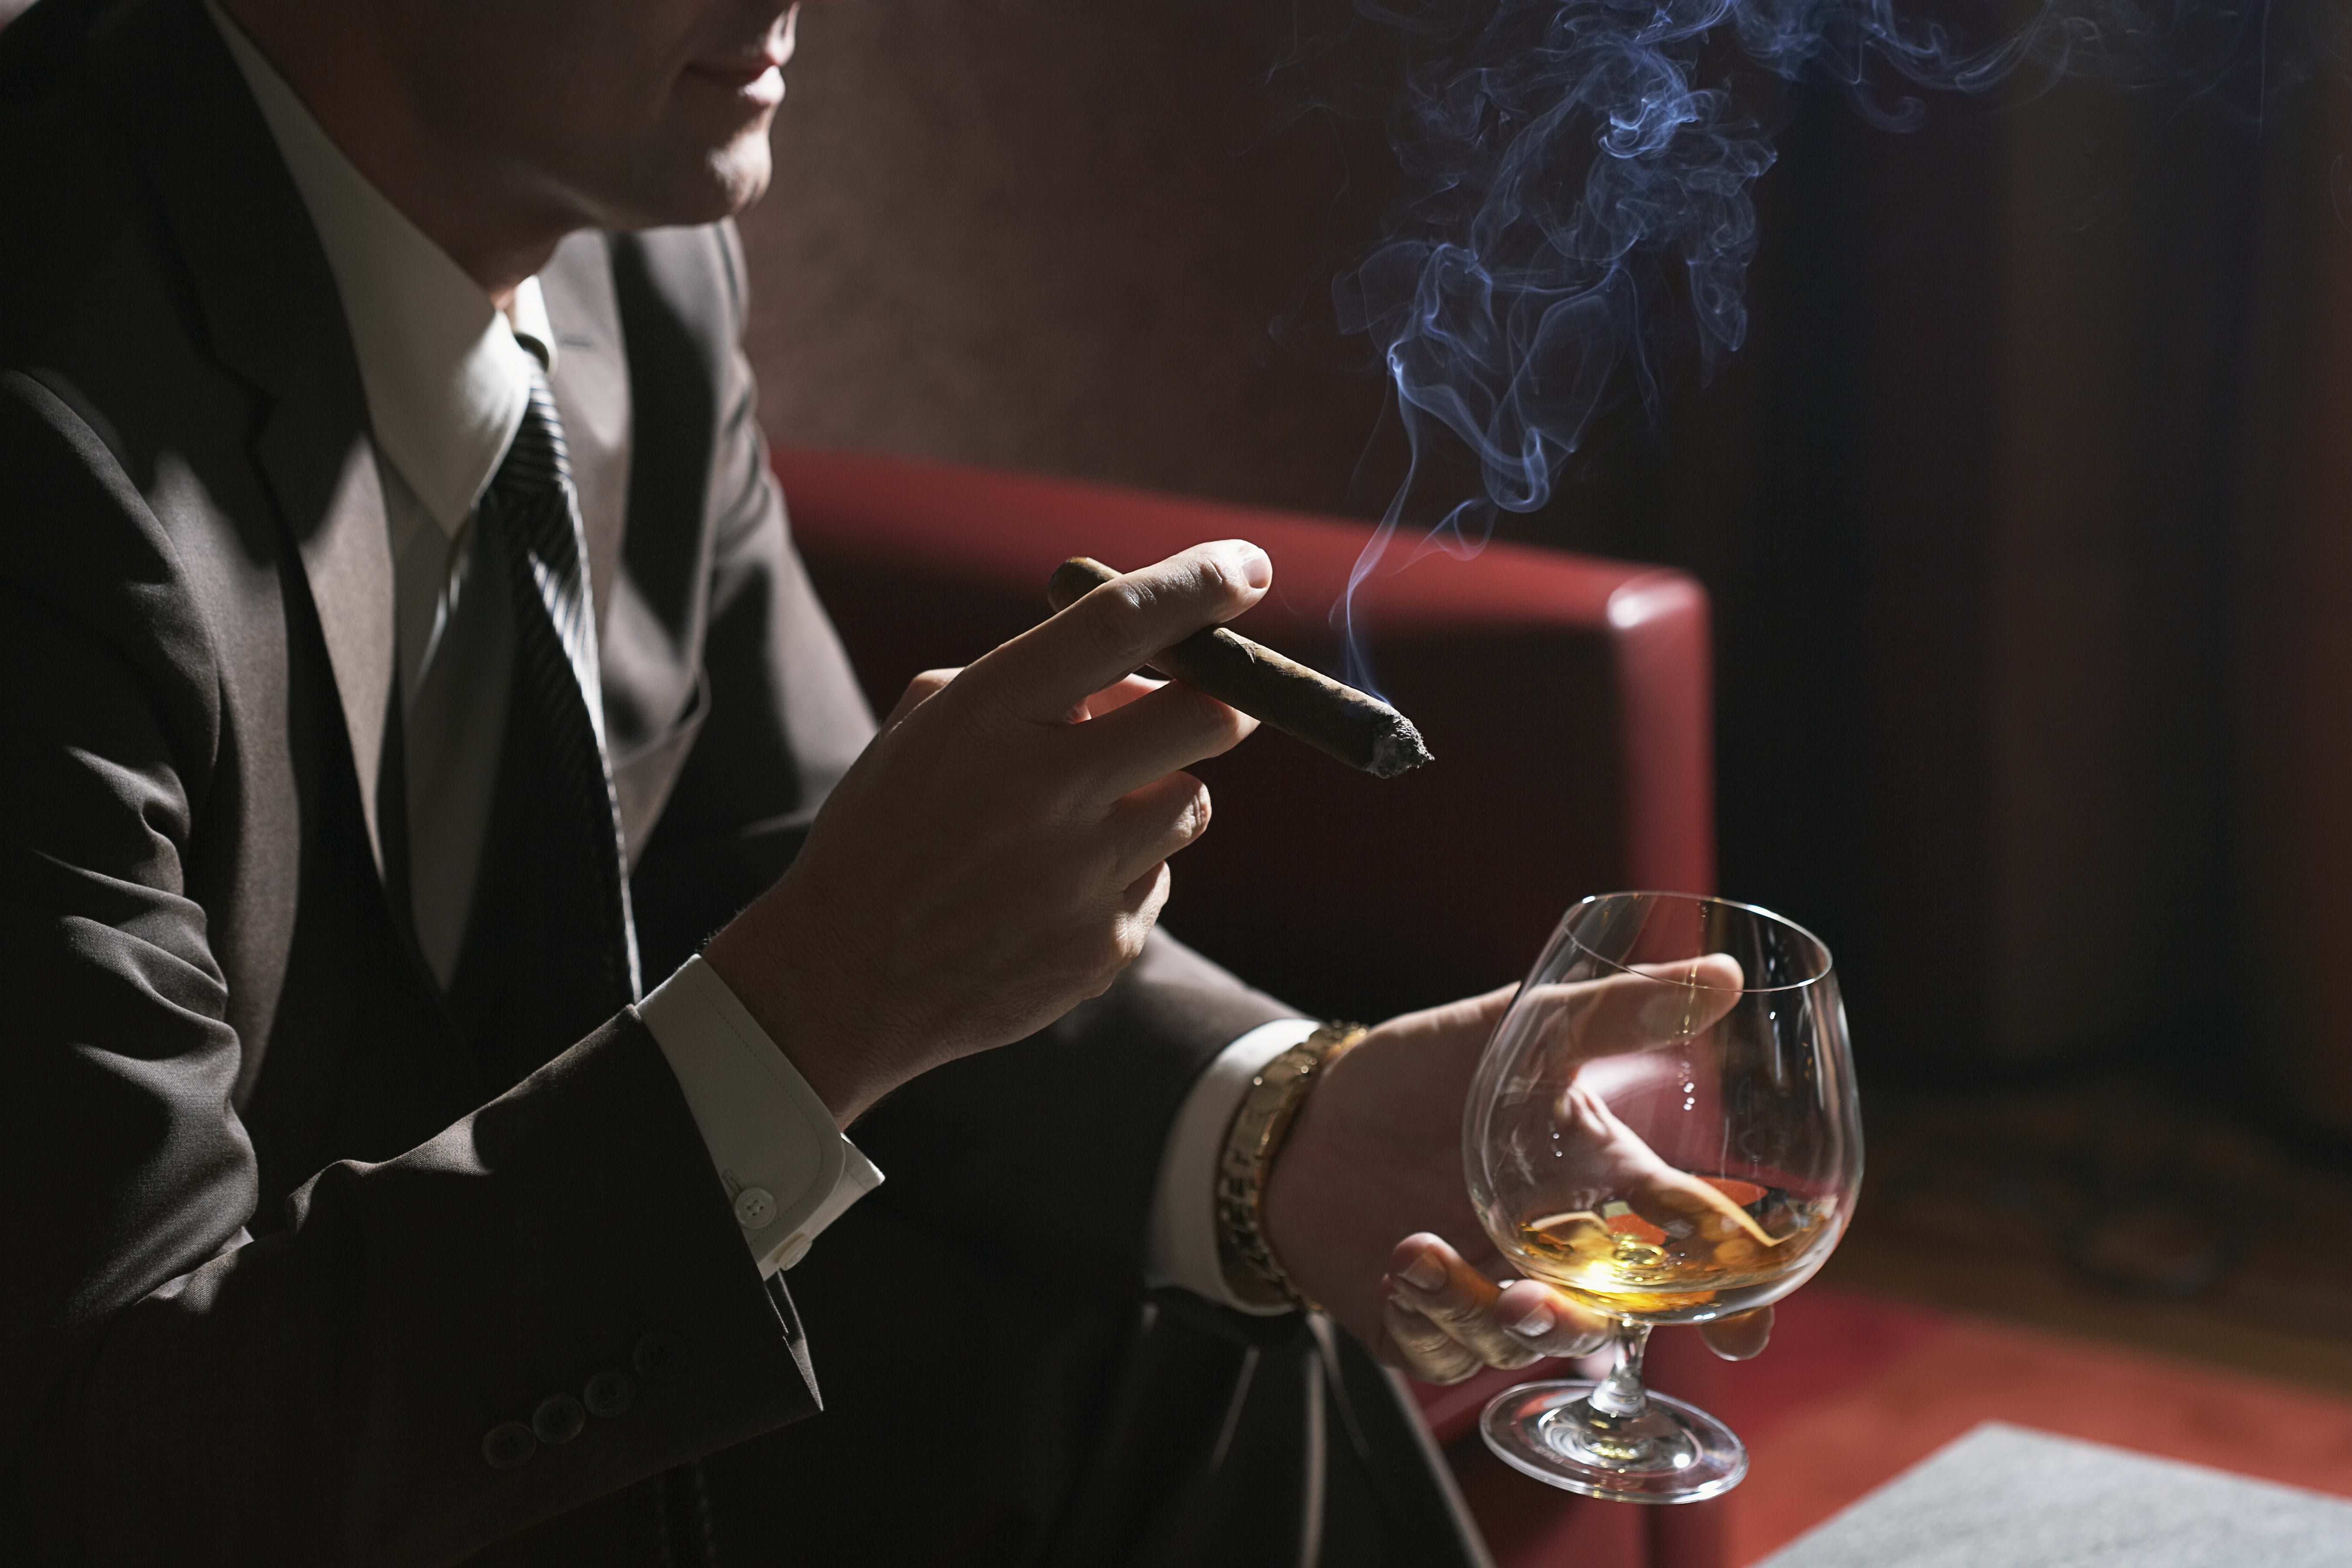 man sitting while holding clear wine glass and tobacco